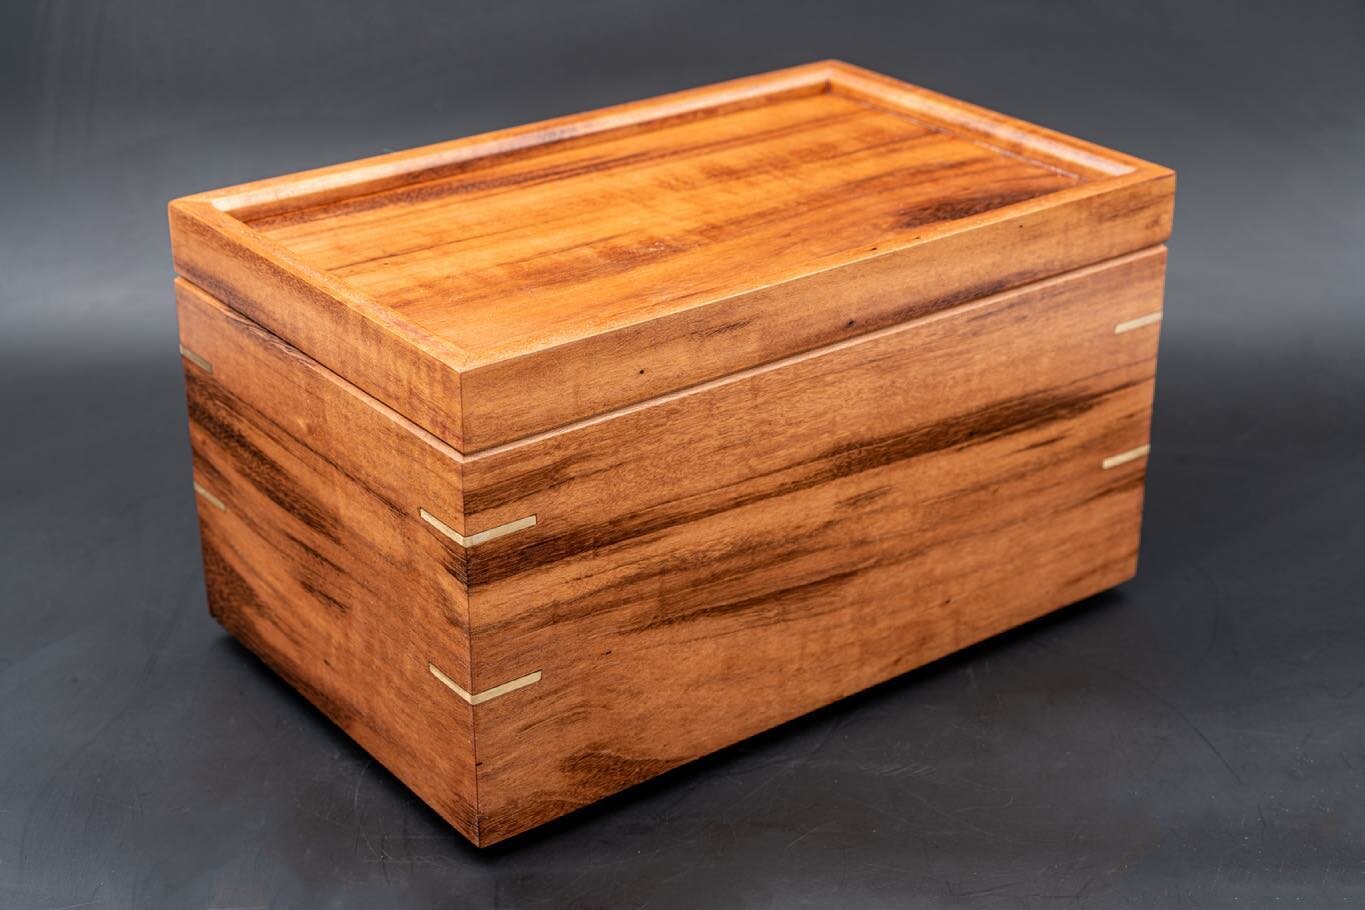 I wanted to challenge myself with something a little bit different for my most recent box.  The main body of this box is made from Goncalo Alves (Tigerwood) with 8 solid brass splines in the mitered corners to give additional support and add a little